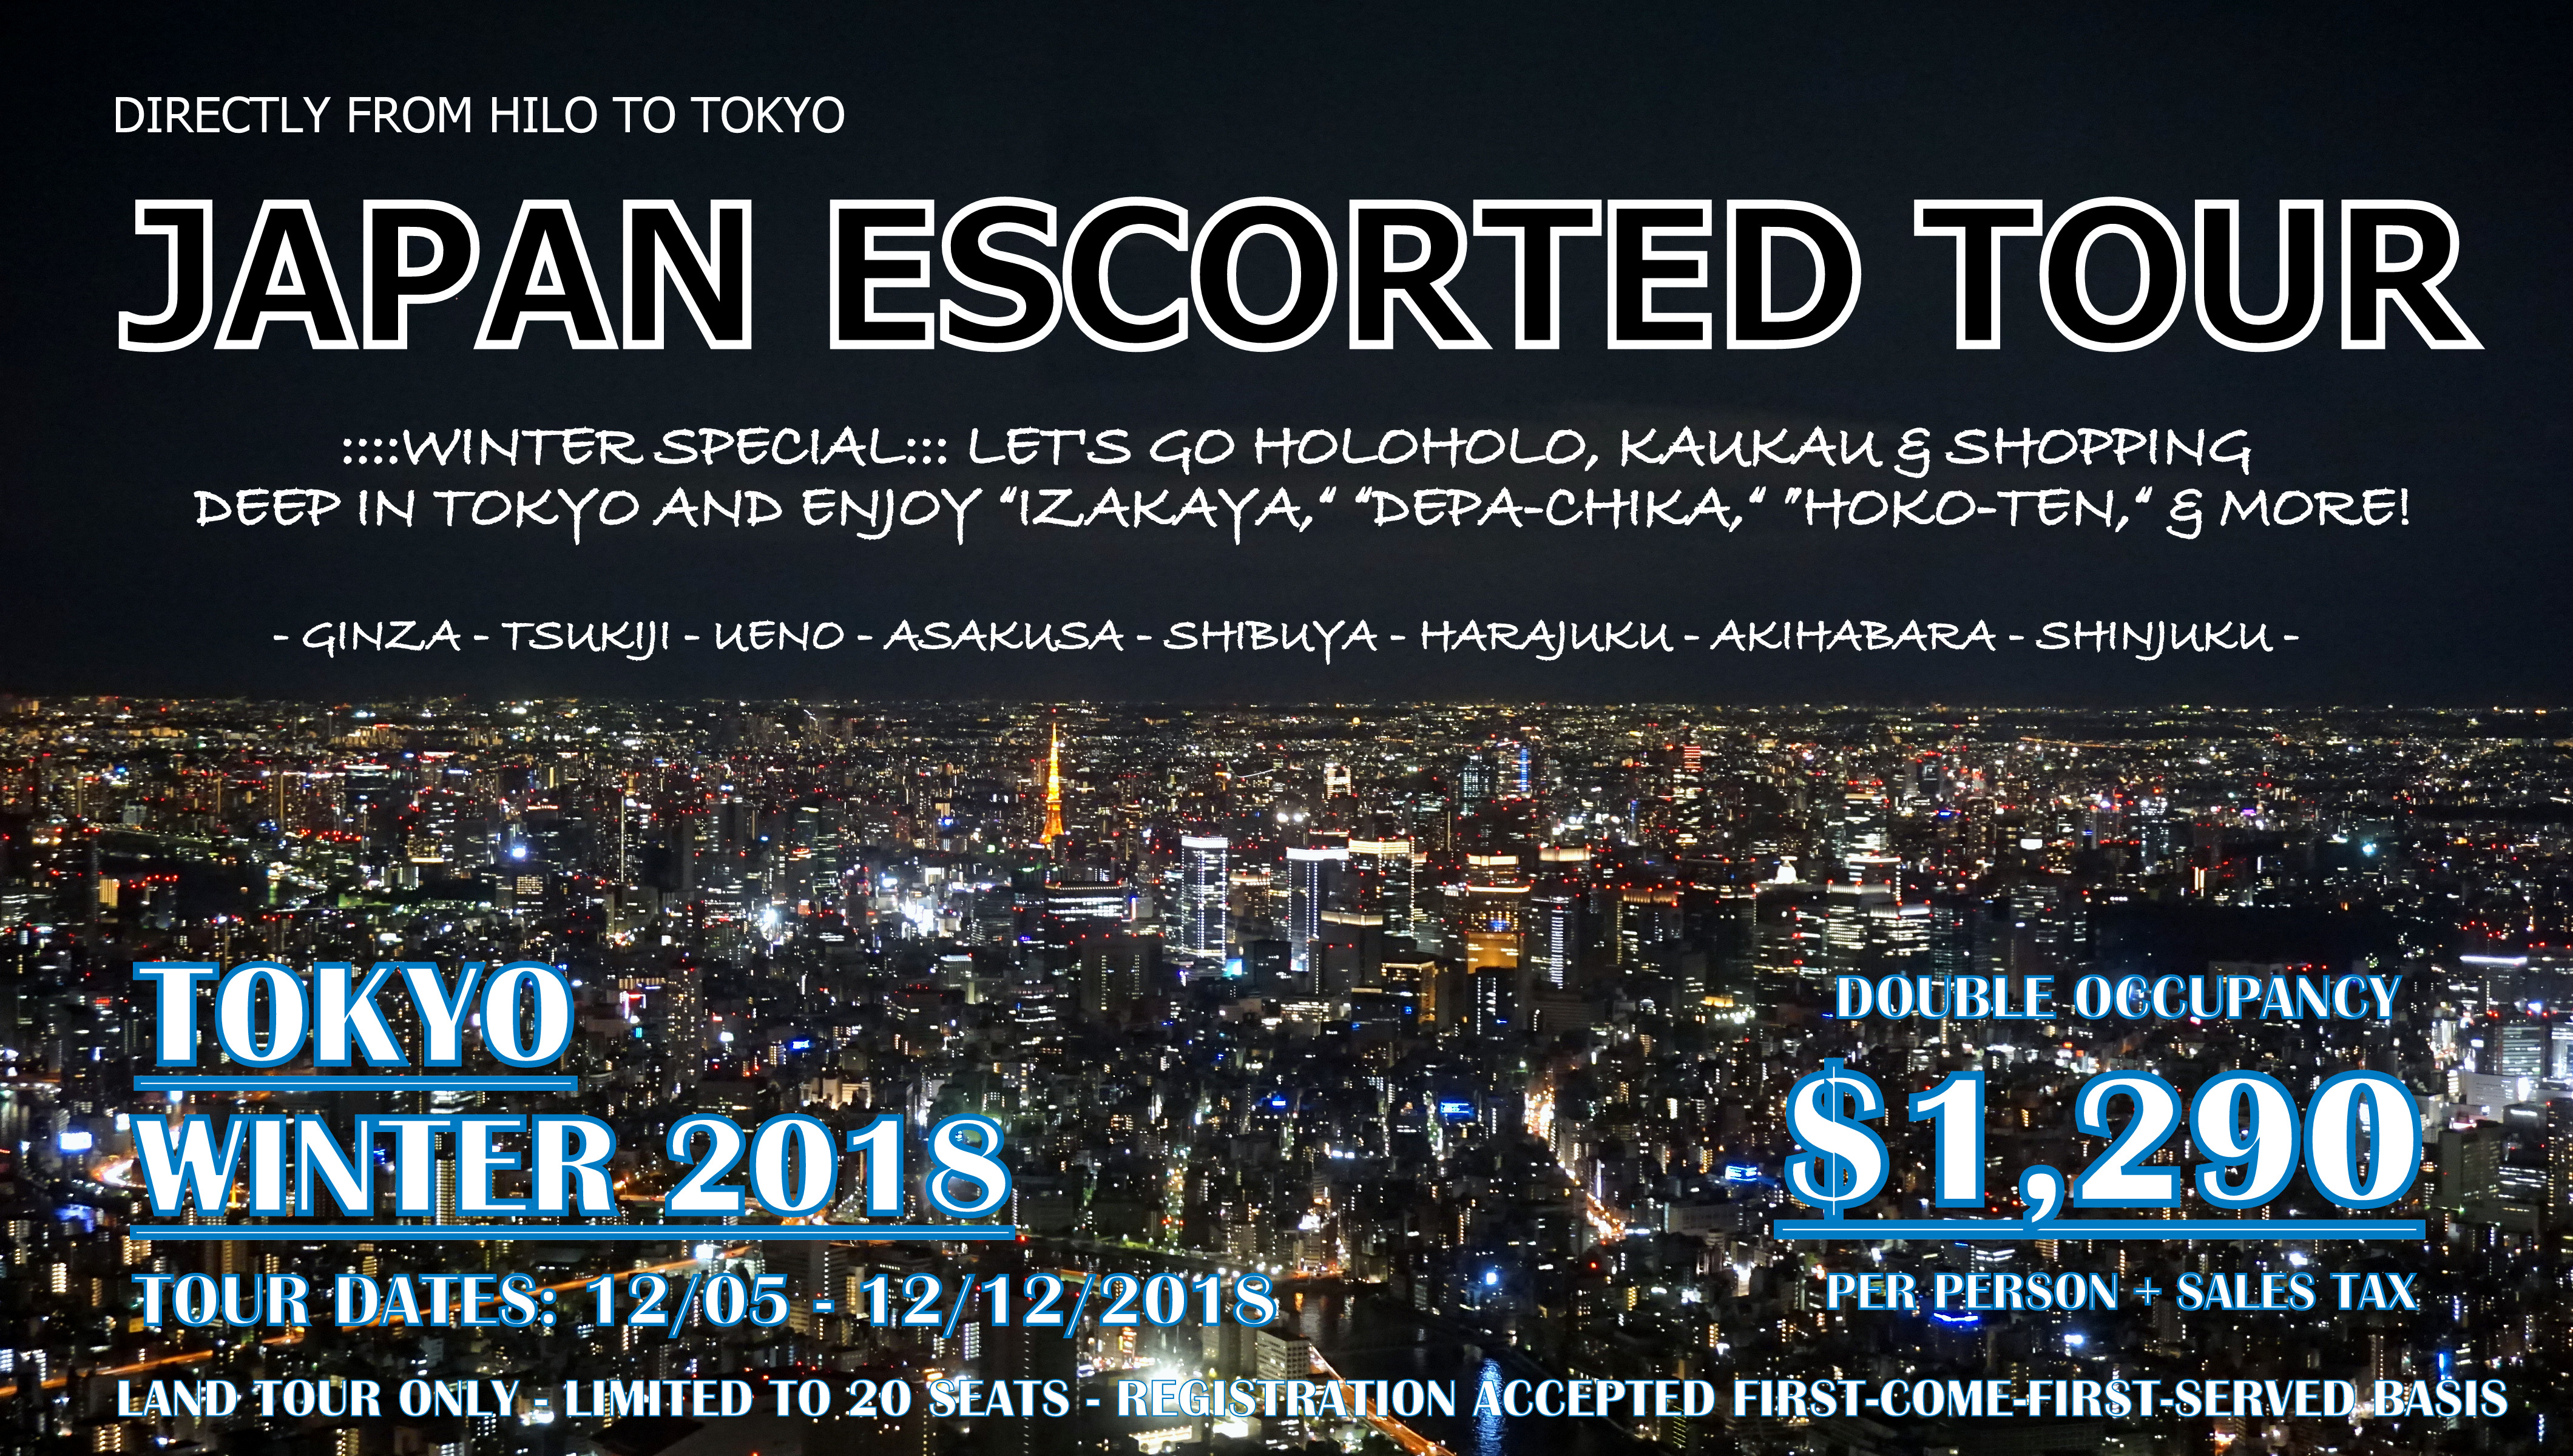 JAPAN ESCORTED TOUR IN WINTER 2018